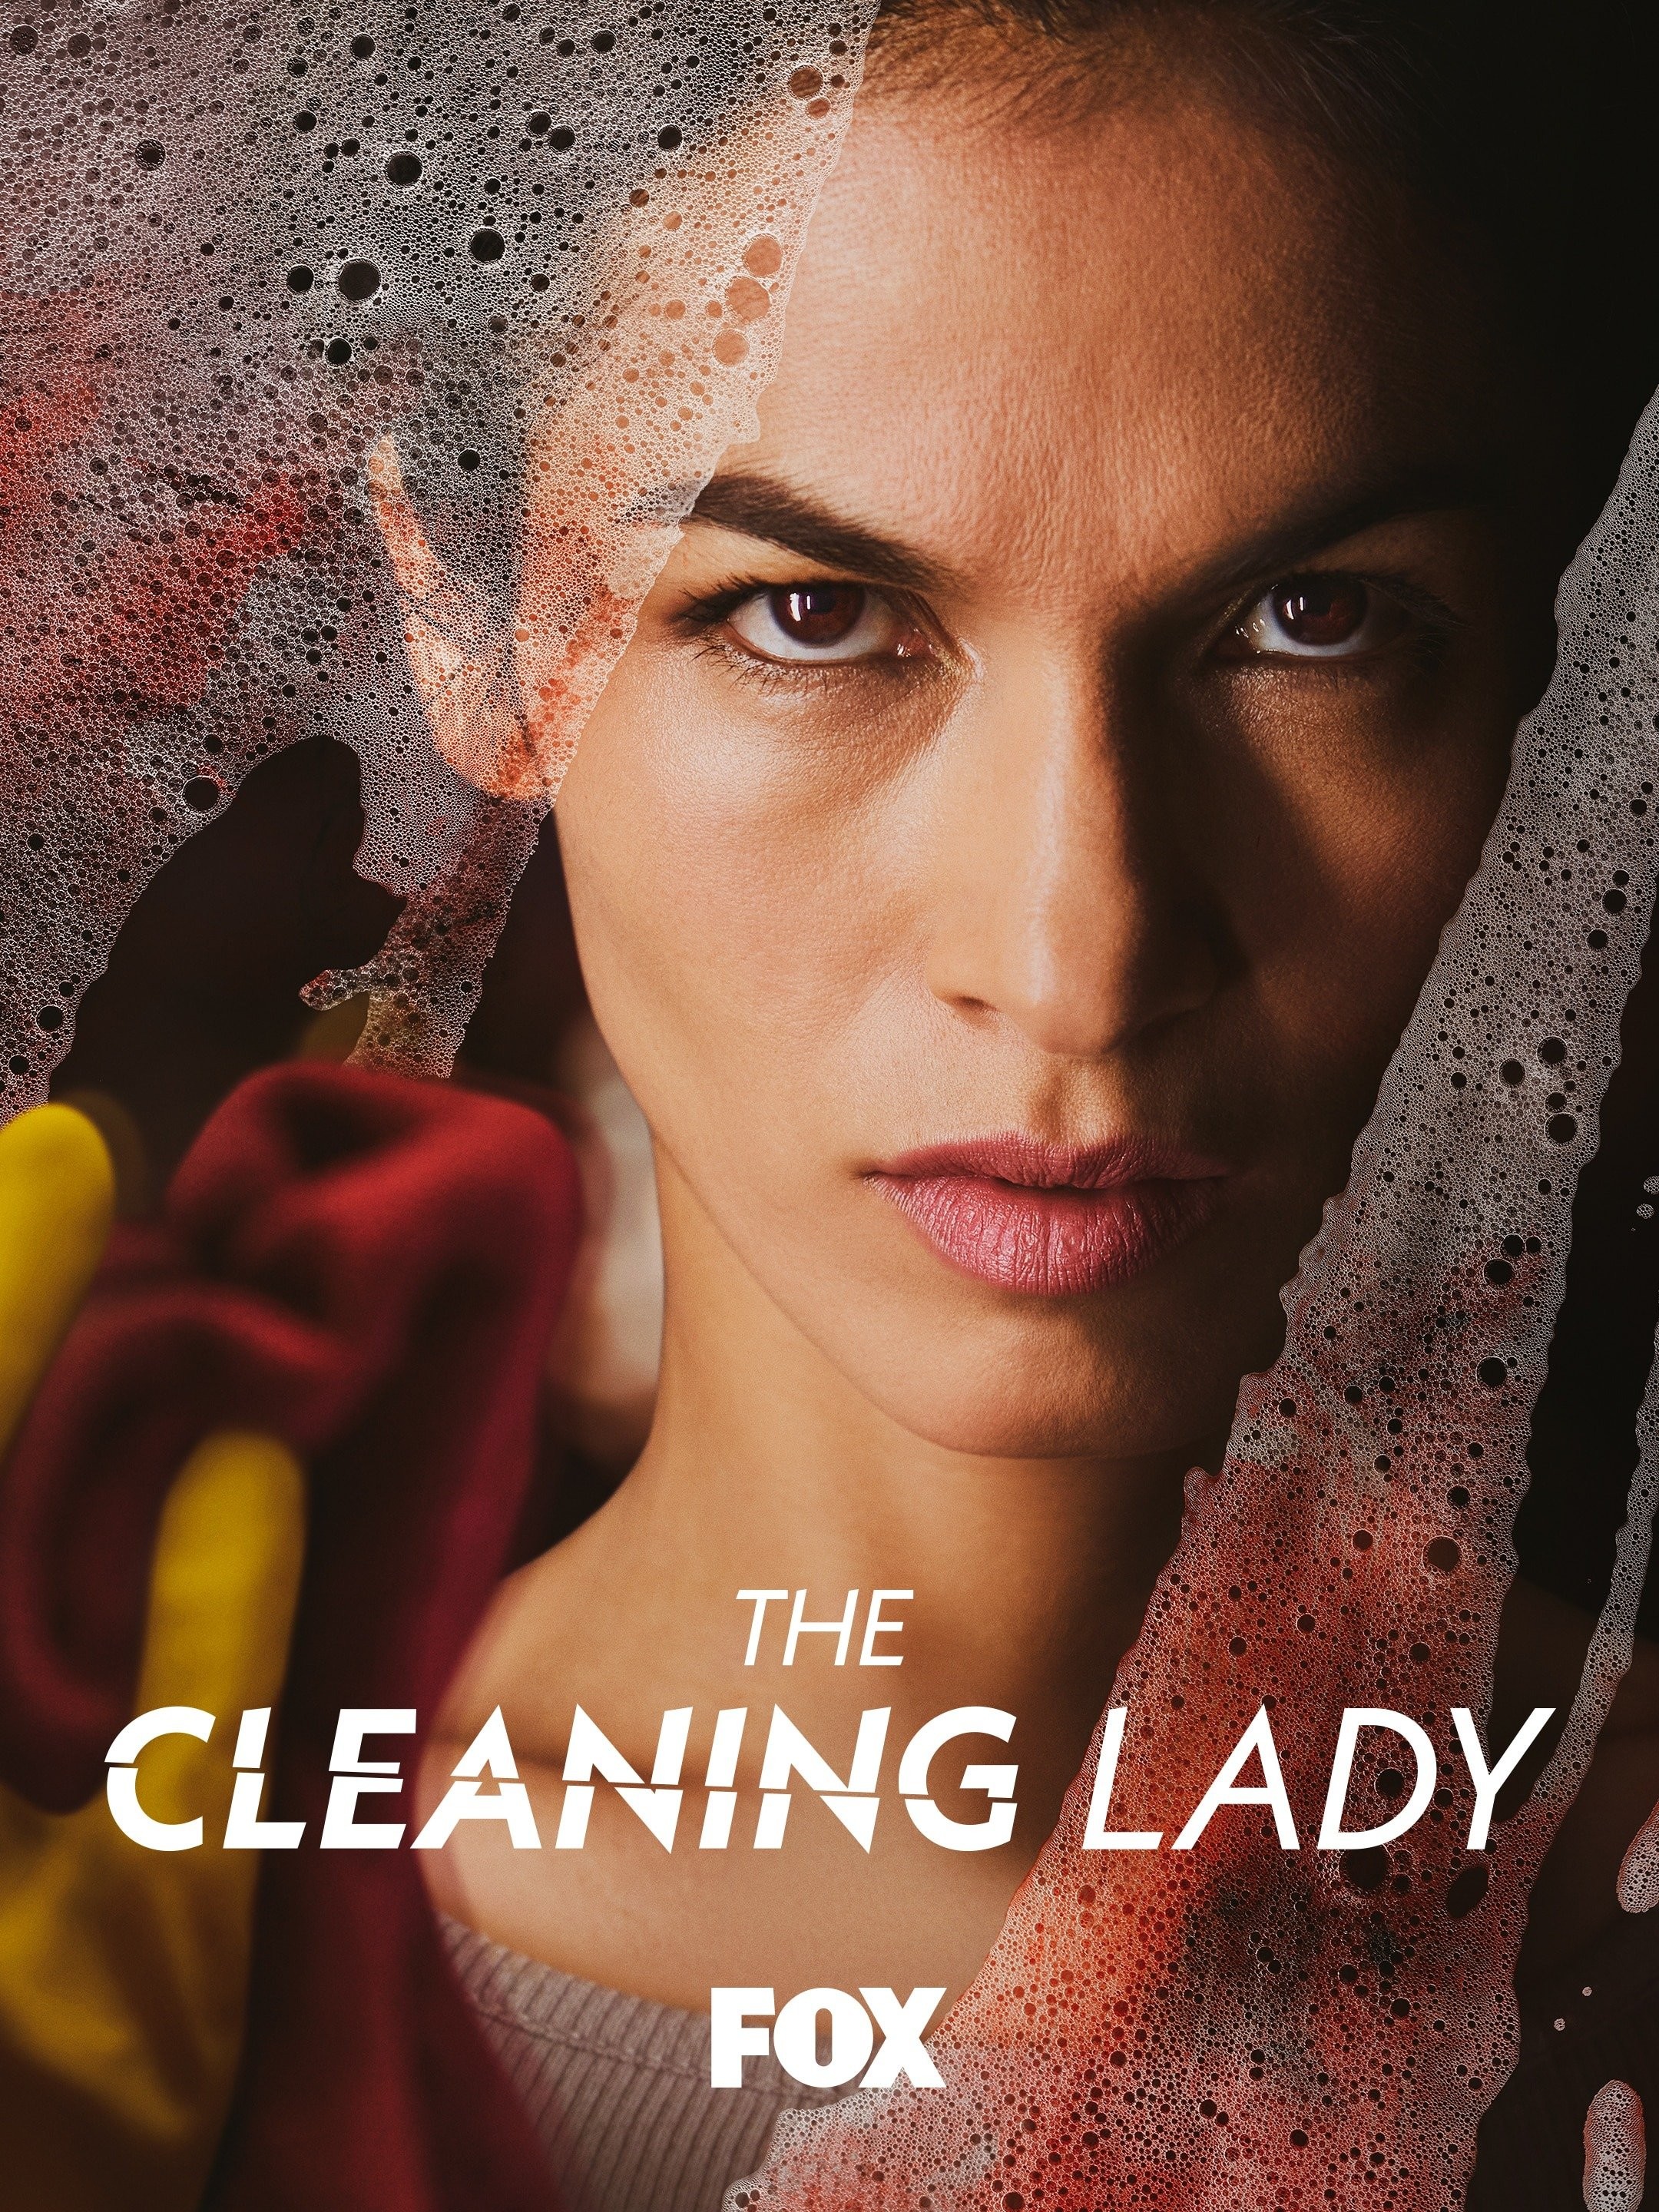 The Cleaner season 2, Release date, cast, trailer and plot